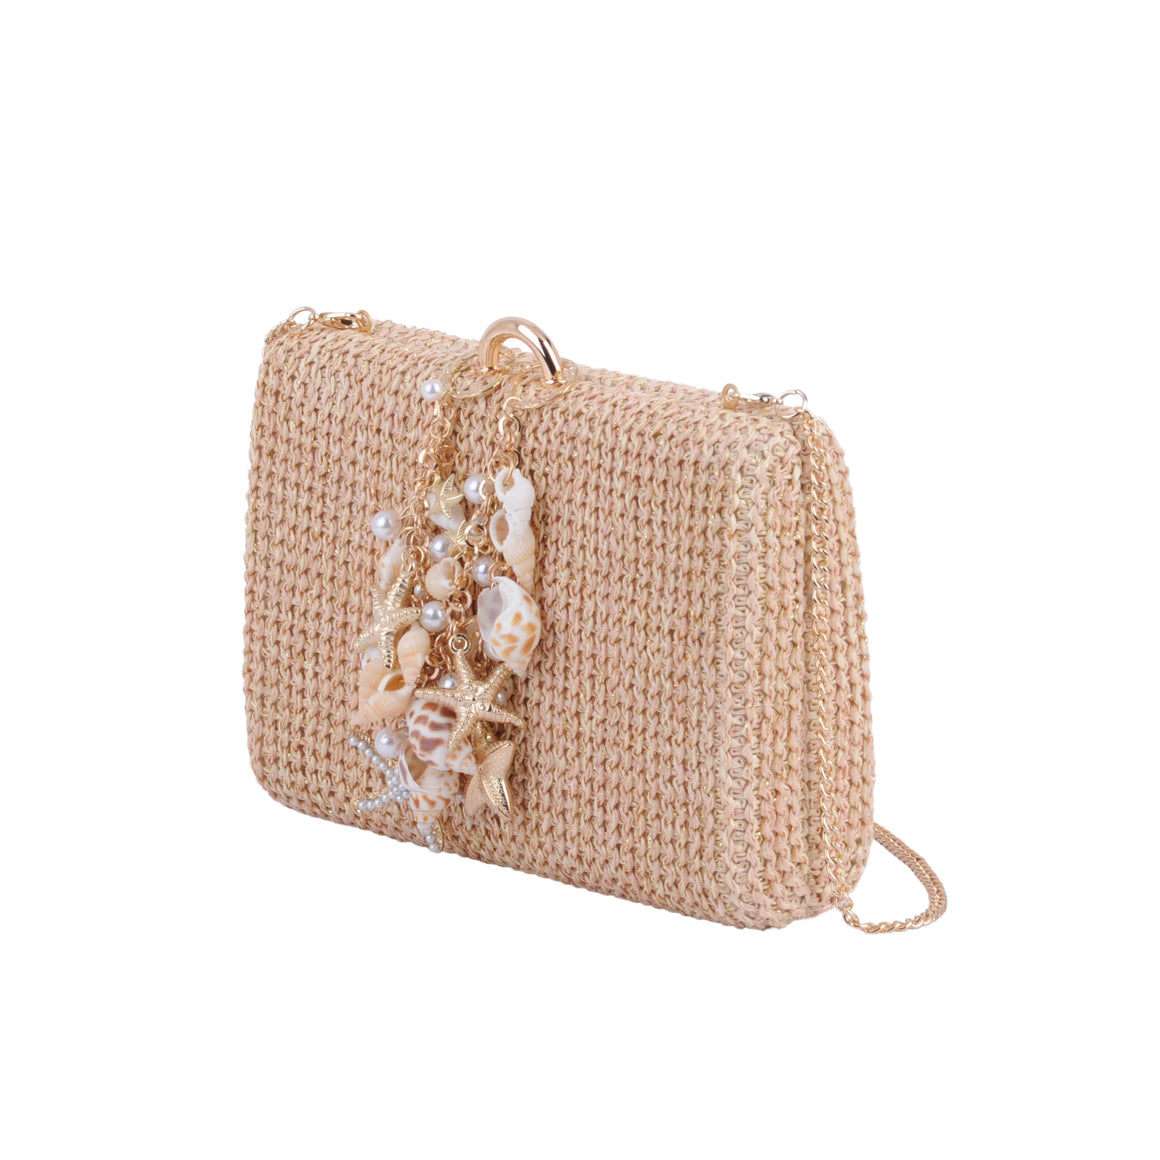 1606 - Seaside Chic: Raffia Clutch with Assorted Seashell Accent and Chain Crossbody Strap